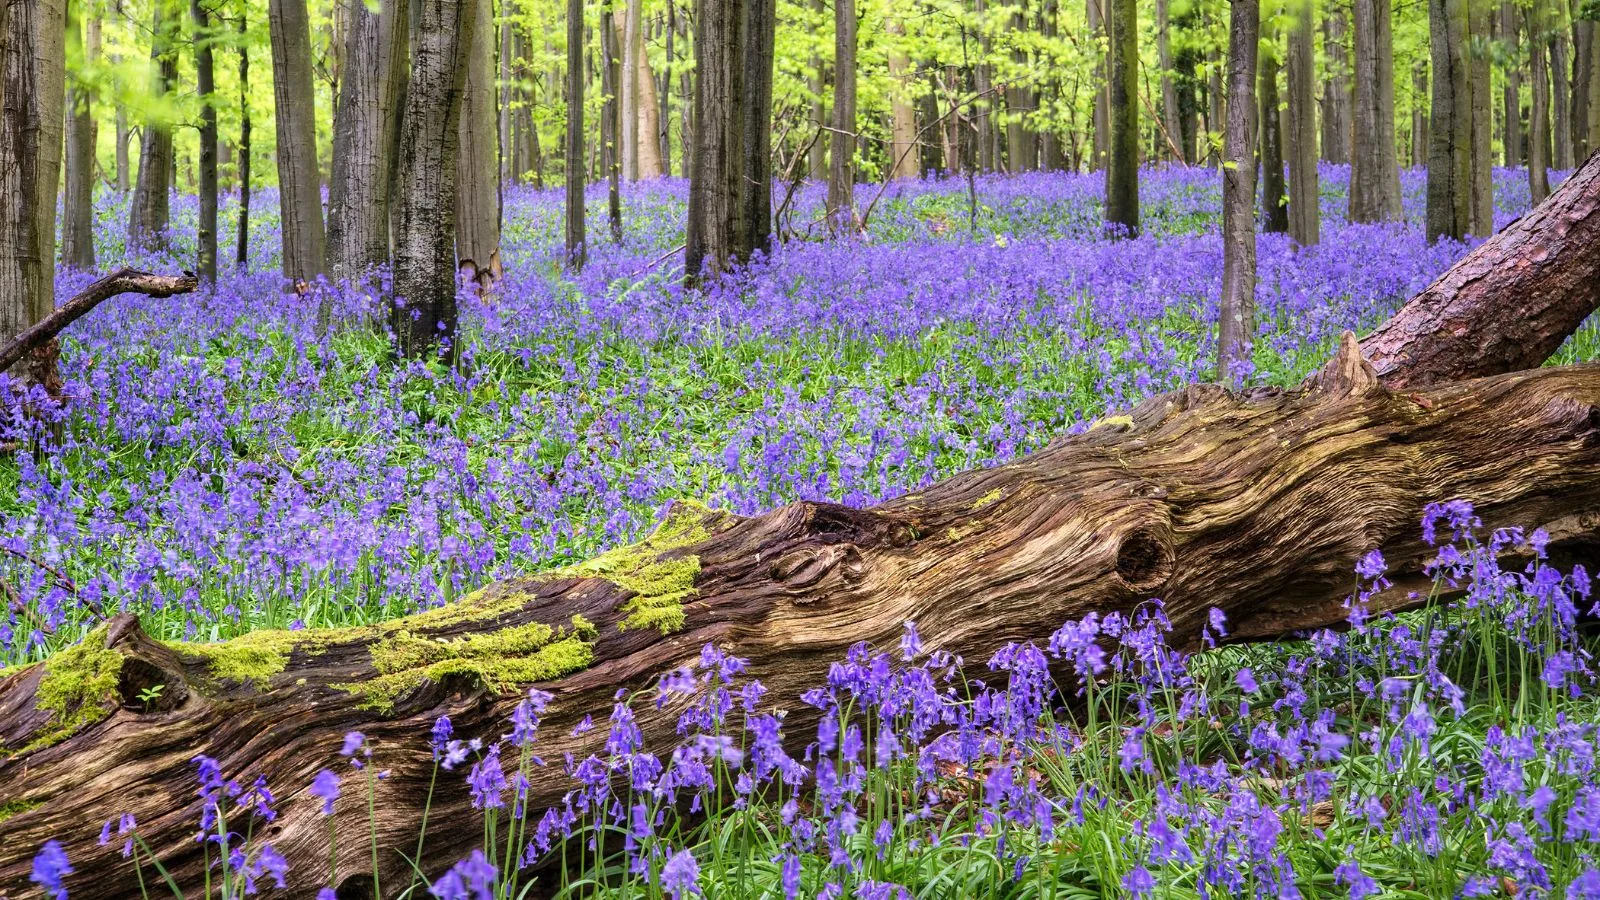 a carpet of bluebell flowers in the spring.